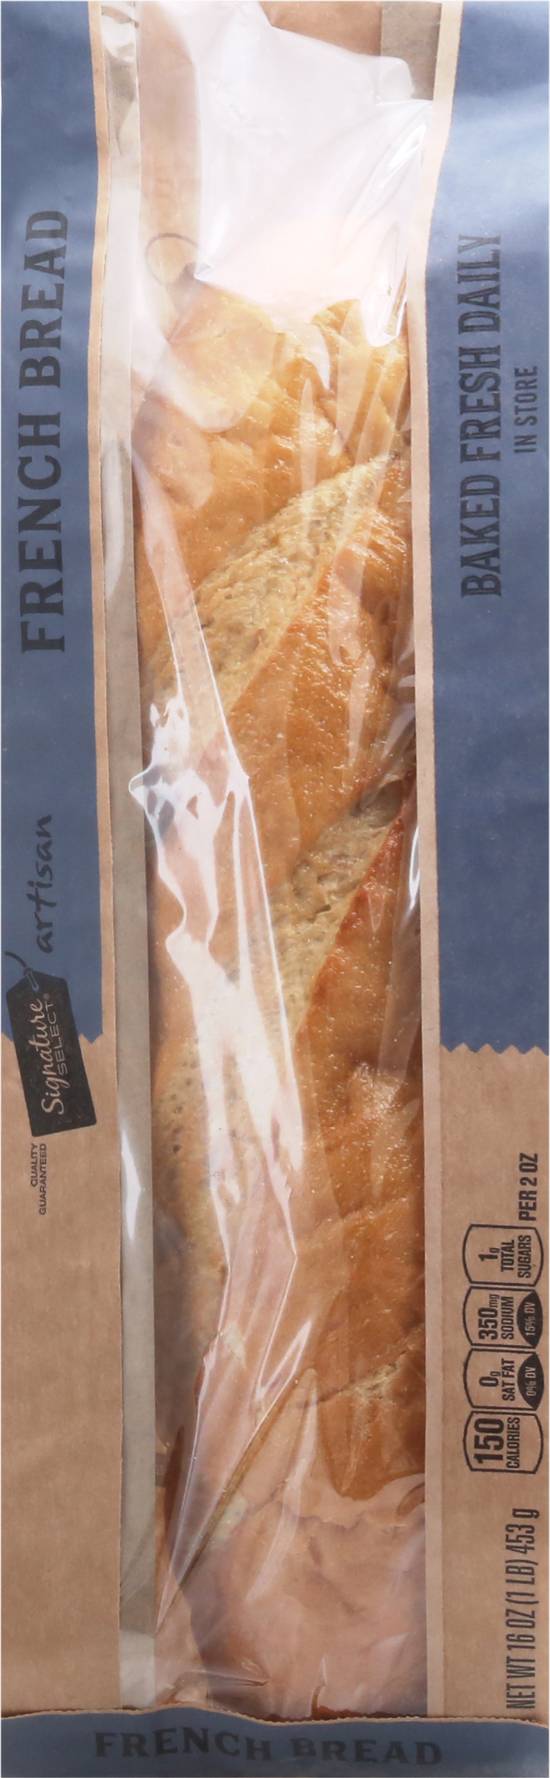 Signature Select Fresh Baked Artisan French Bread